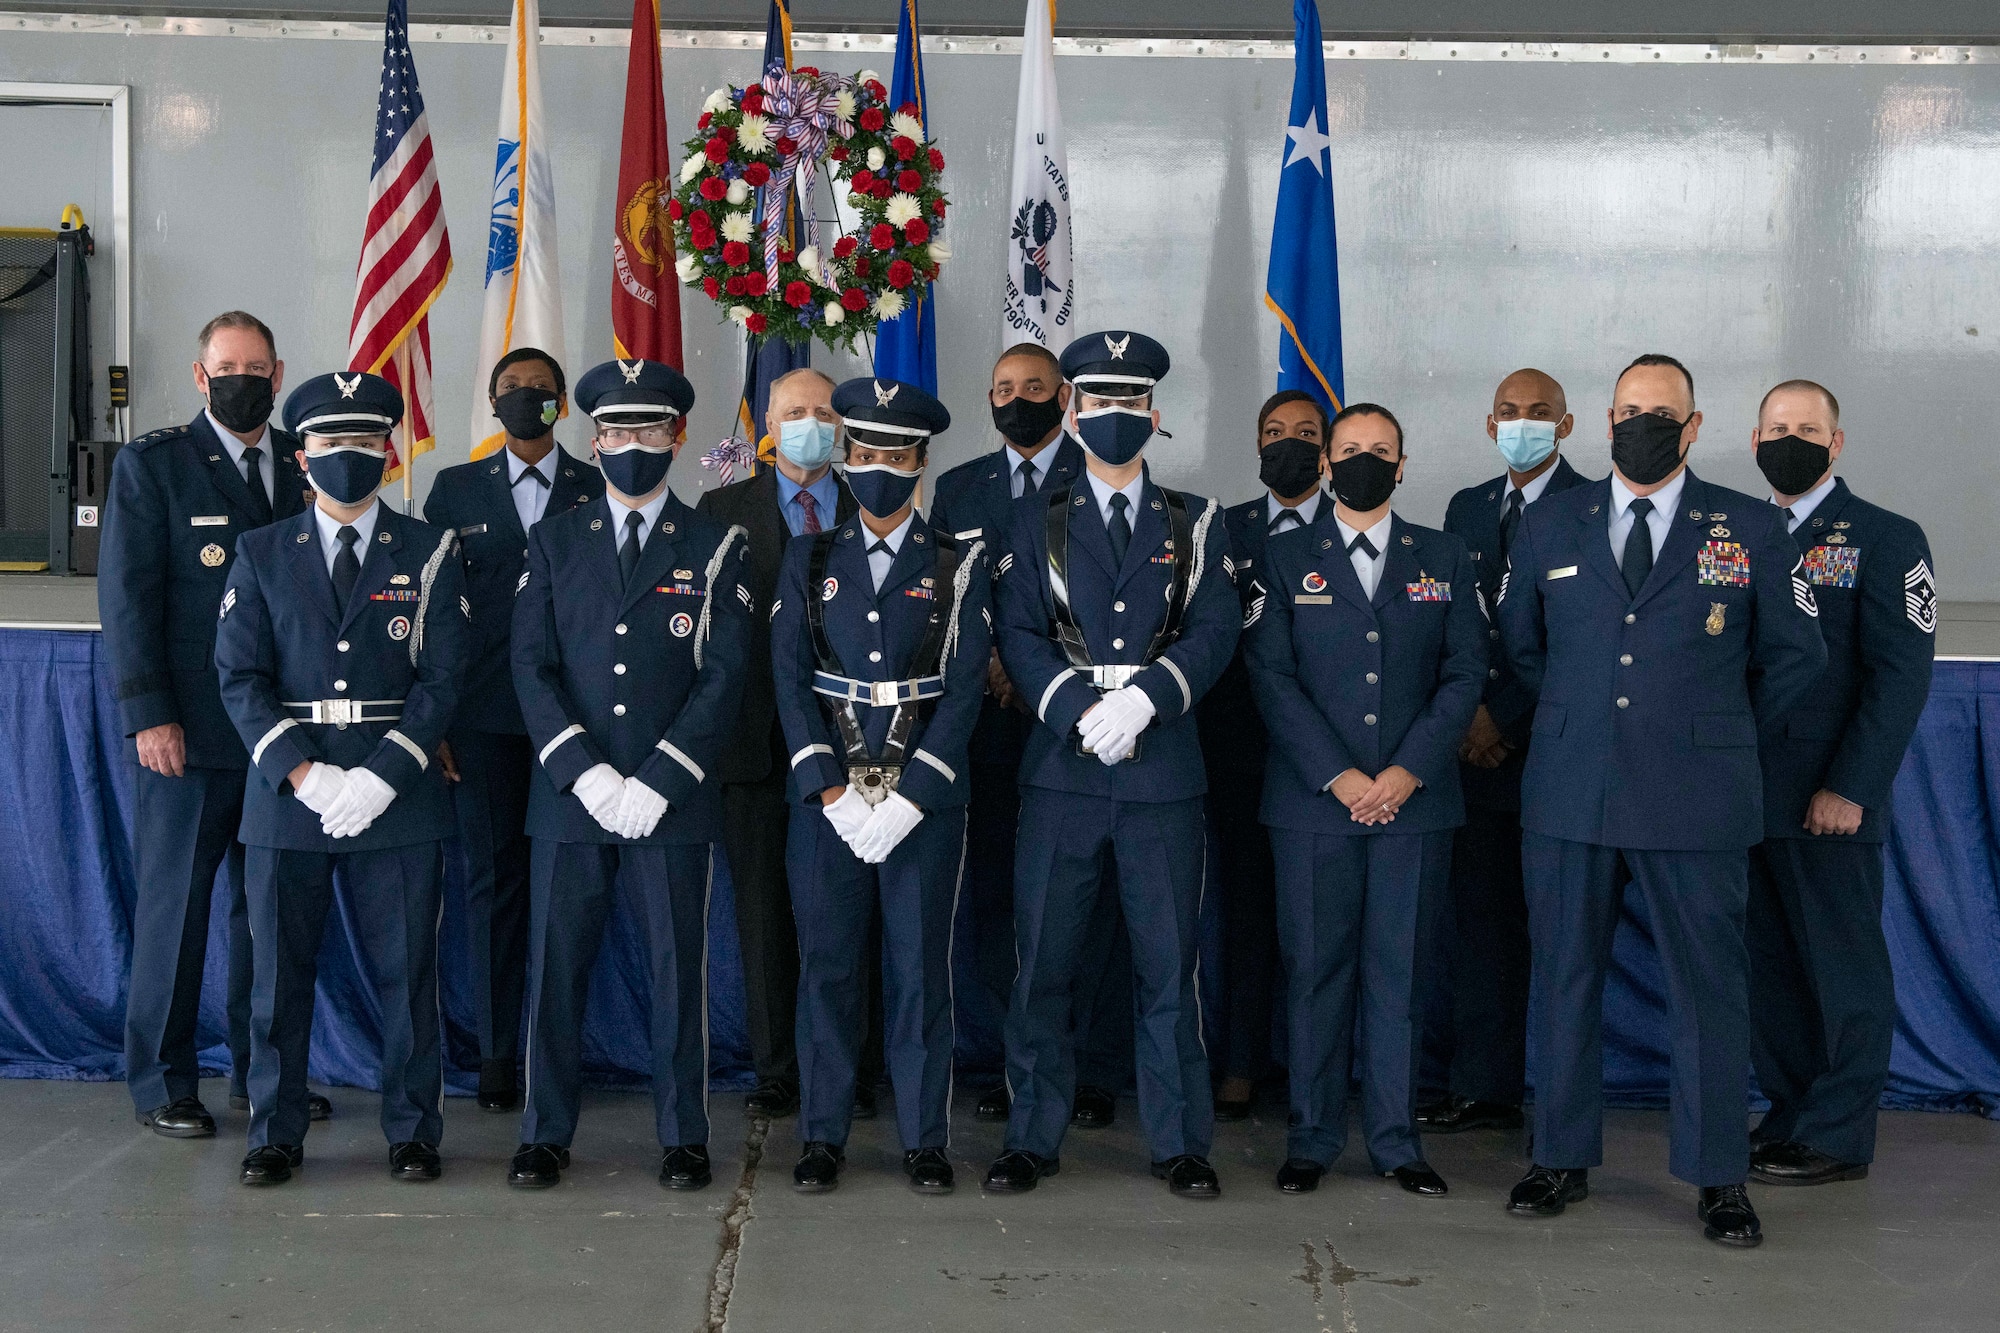 Air University and 42nd Air Base Wing leadership poses for a photo alongside Maxwell Air Force Base Honor Guard members Nov. 11, 2020. (U.S. Air Force photo by Senior Airman Charles Welty)